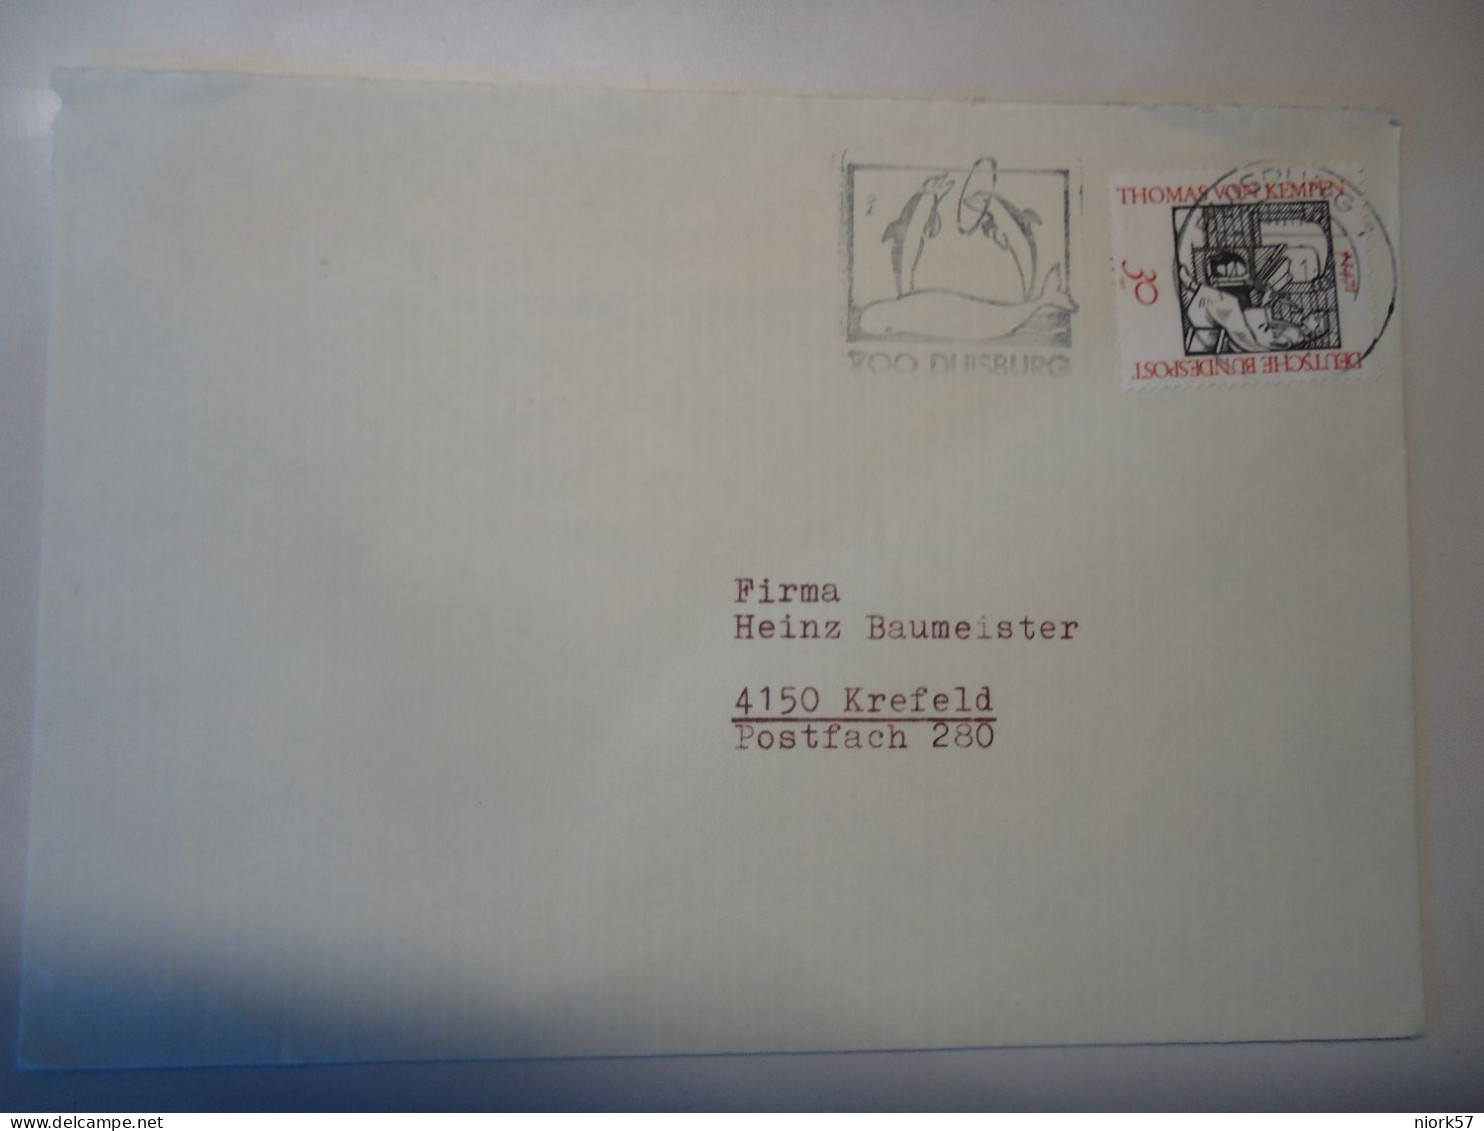 GERMANY   COVER  1971 POSTMARK DOLPHINS - Dolphins